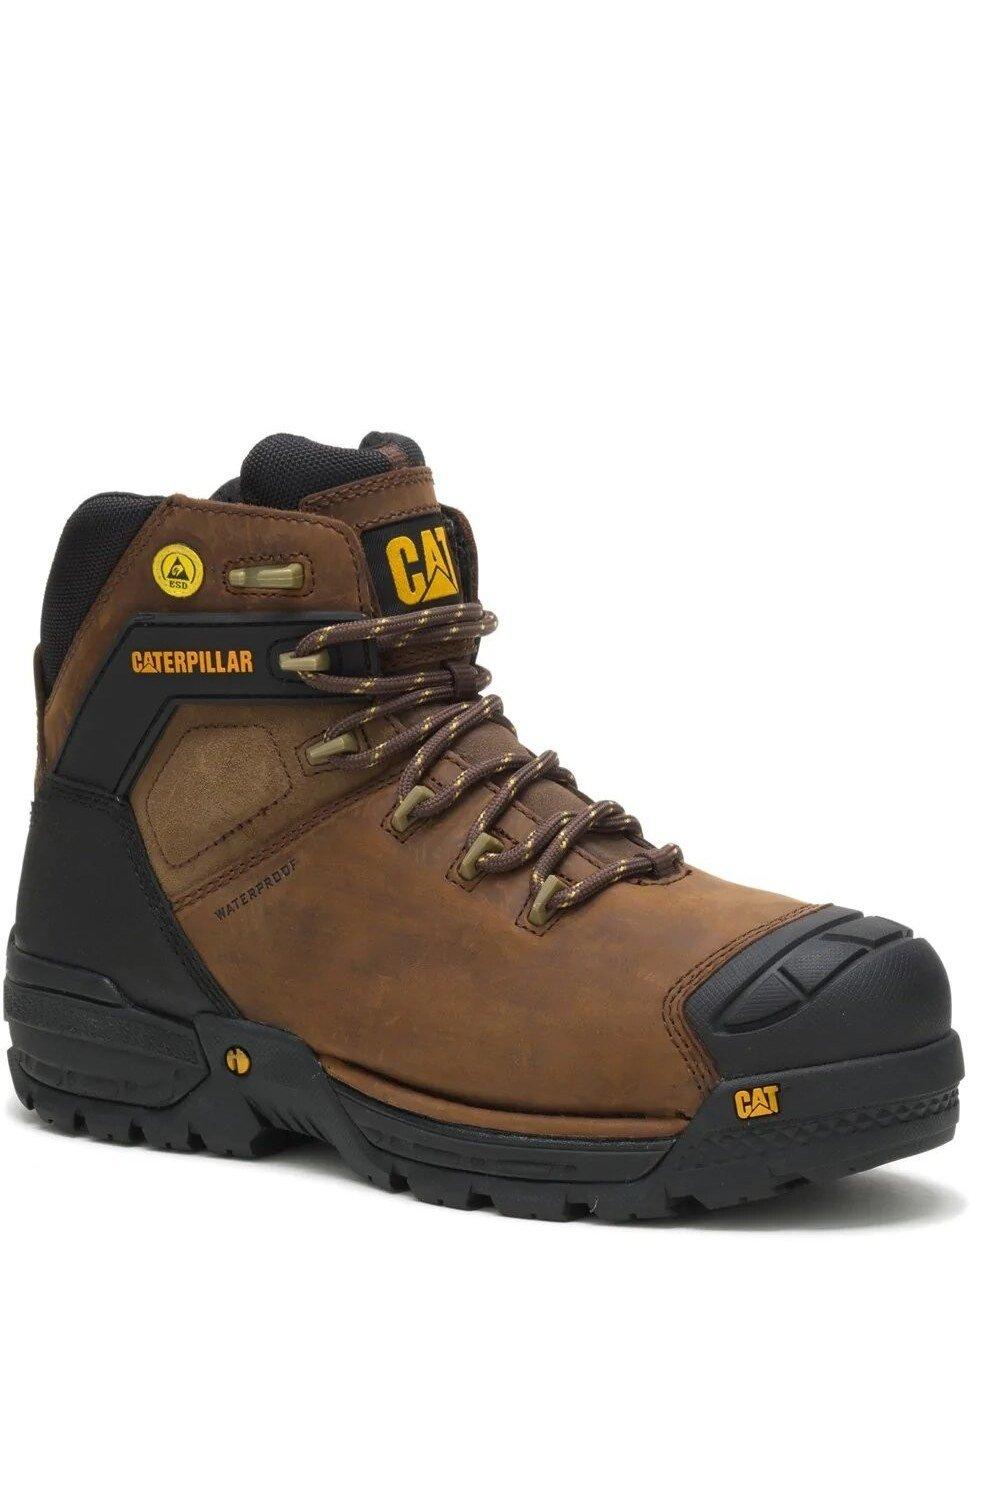 excavator grain leather safety boots